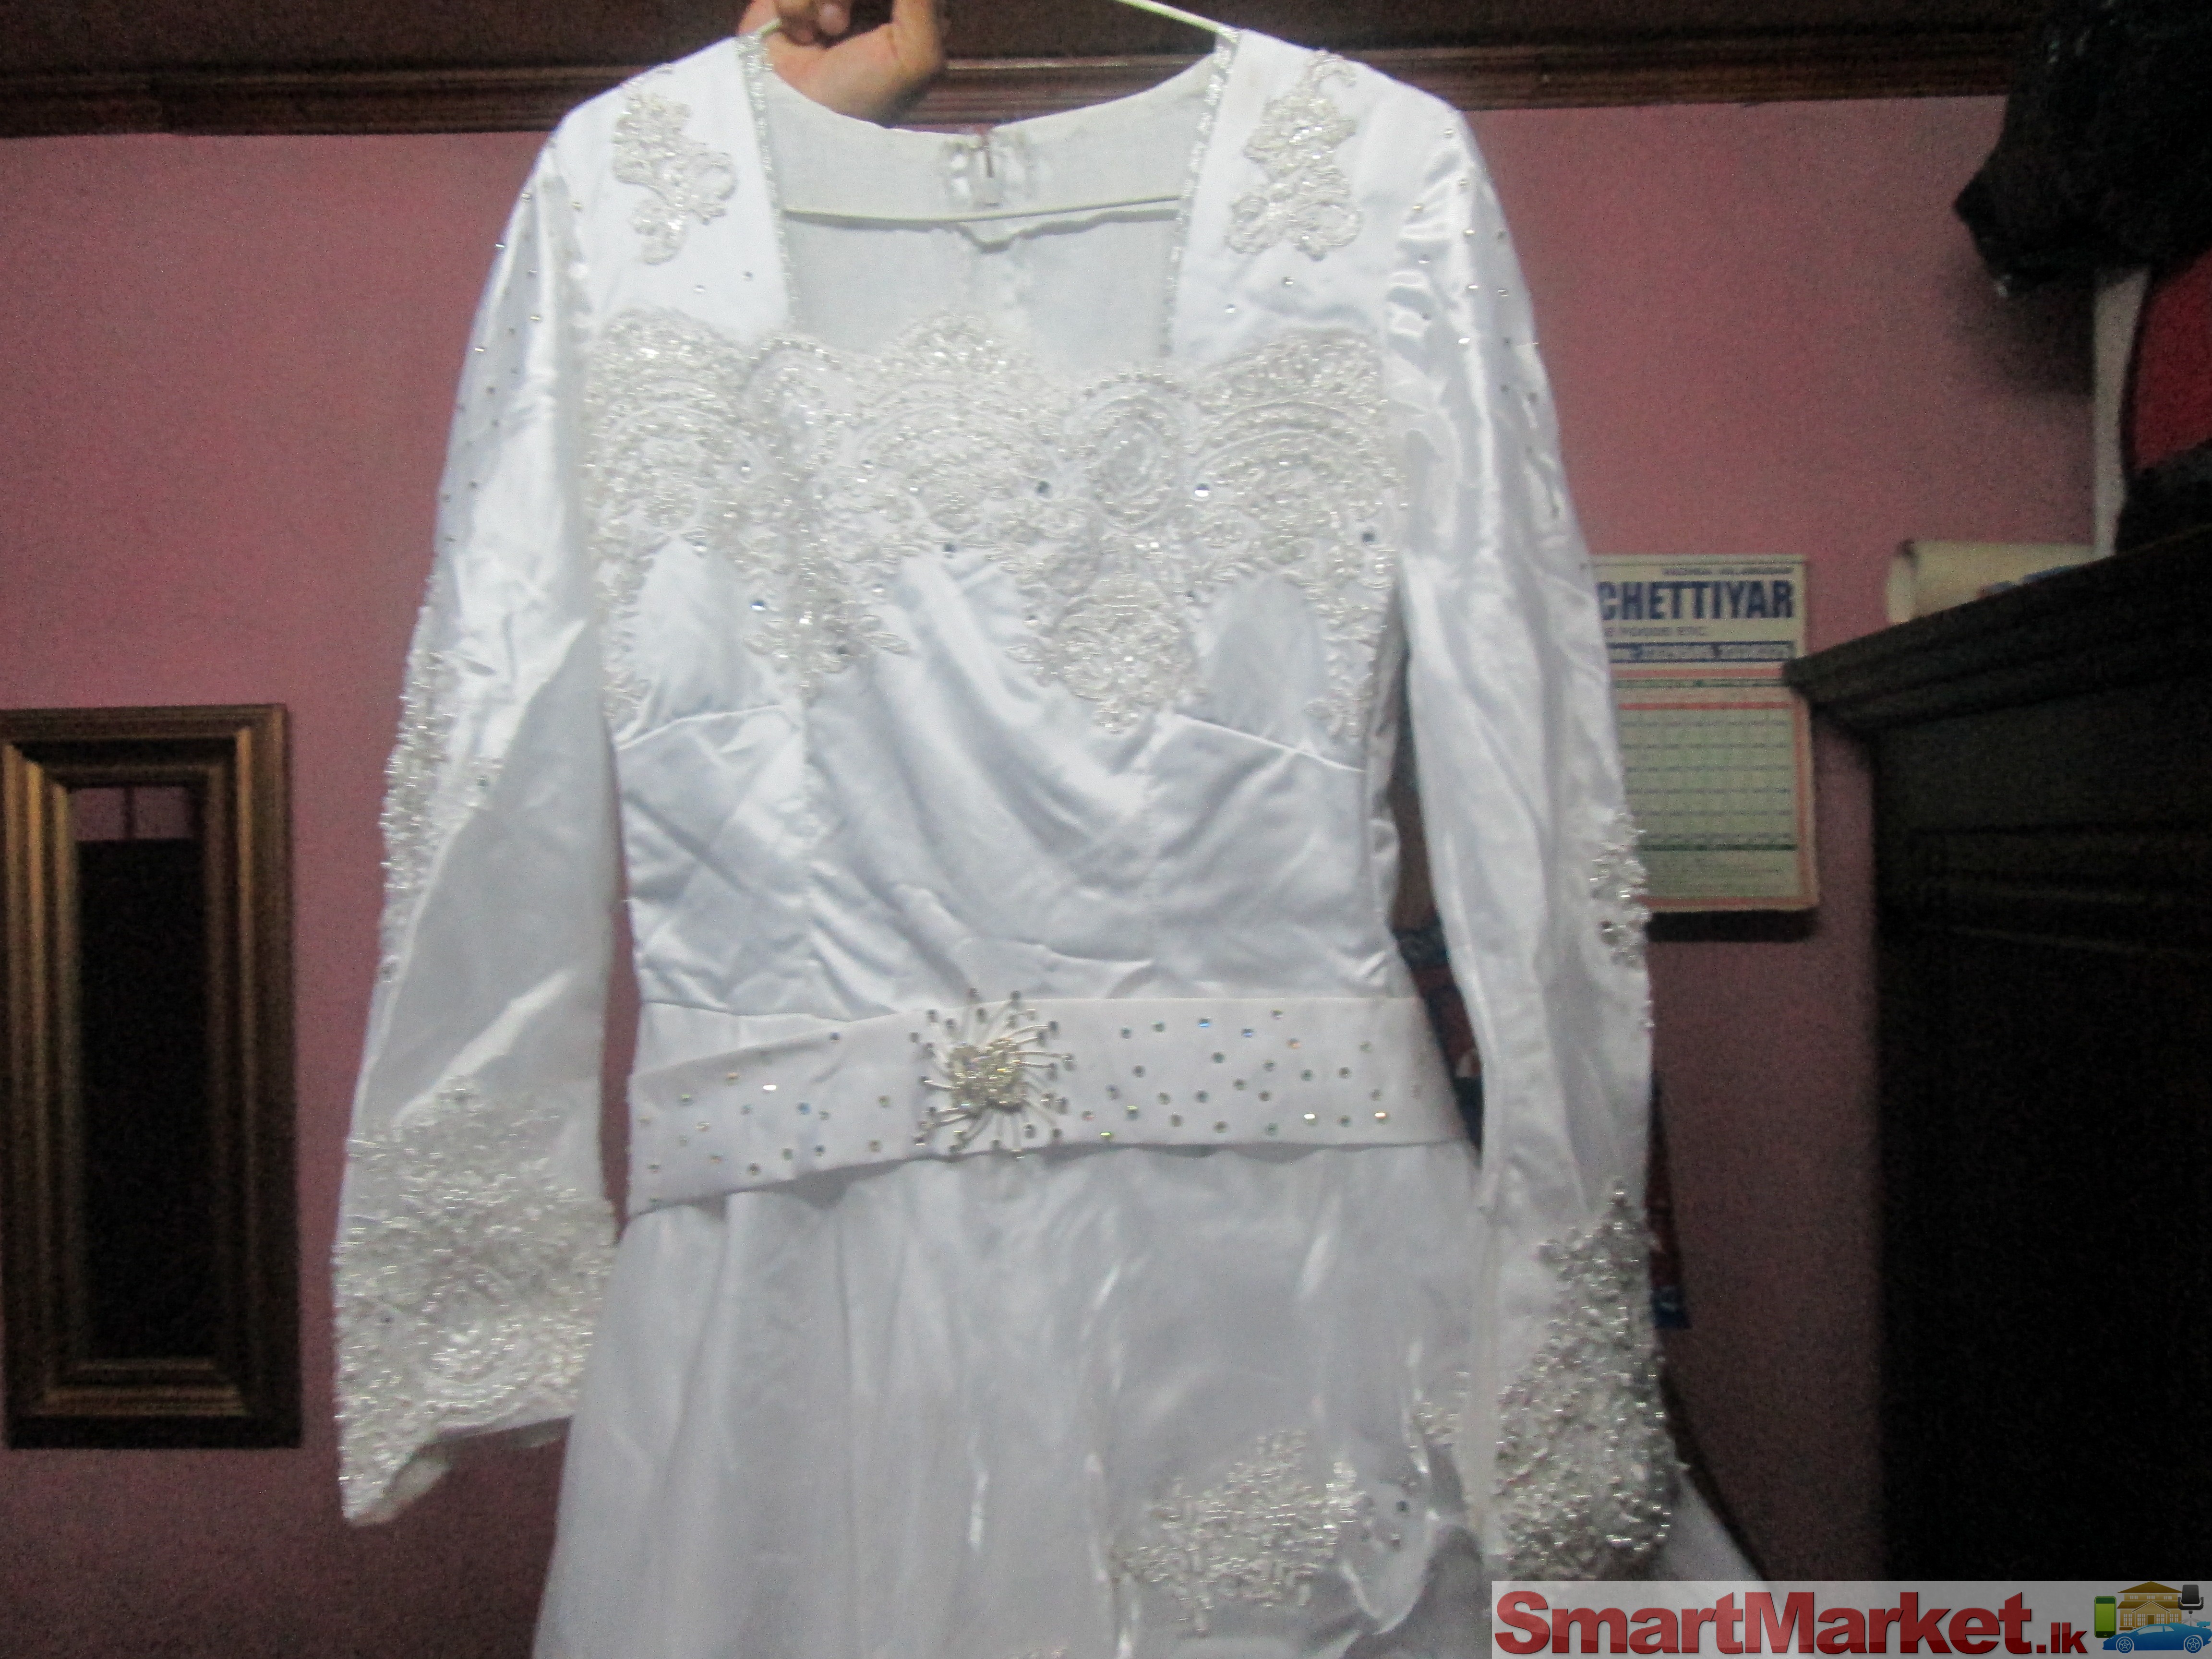 Single Used Wedding Dress With Accessories